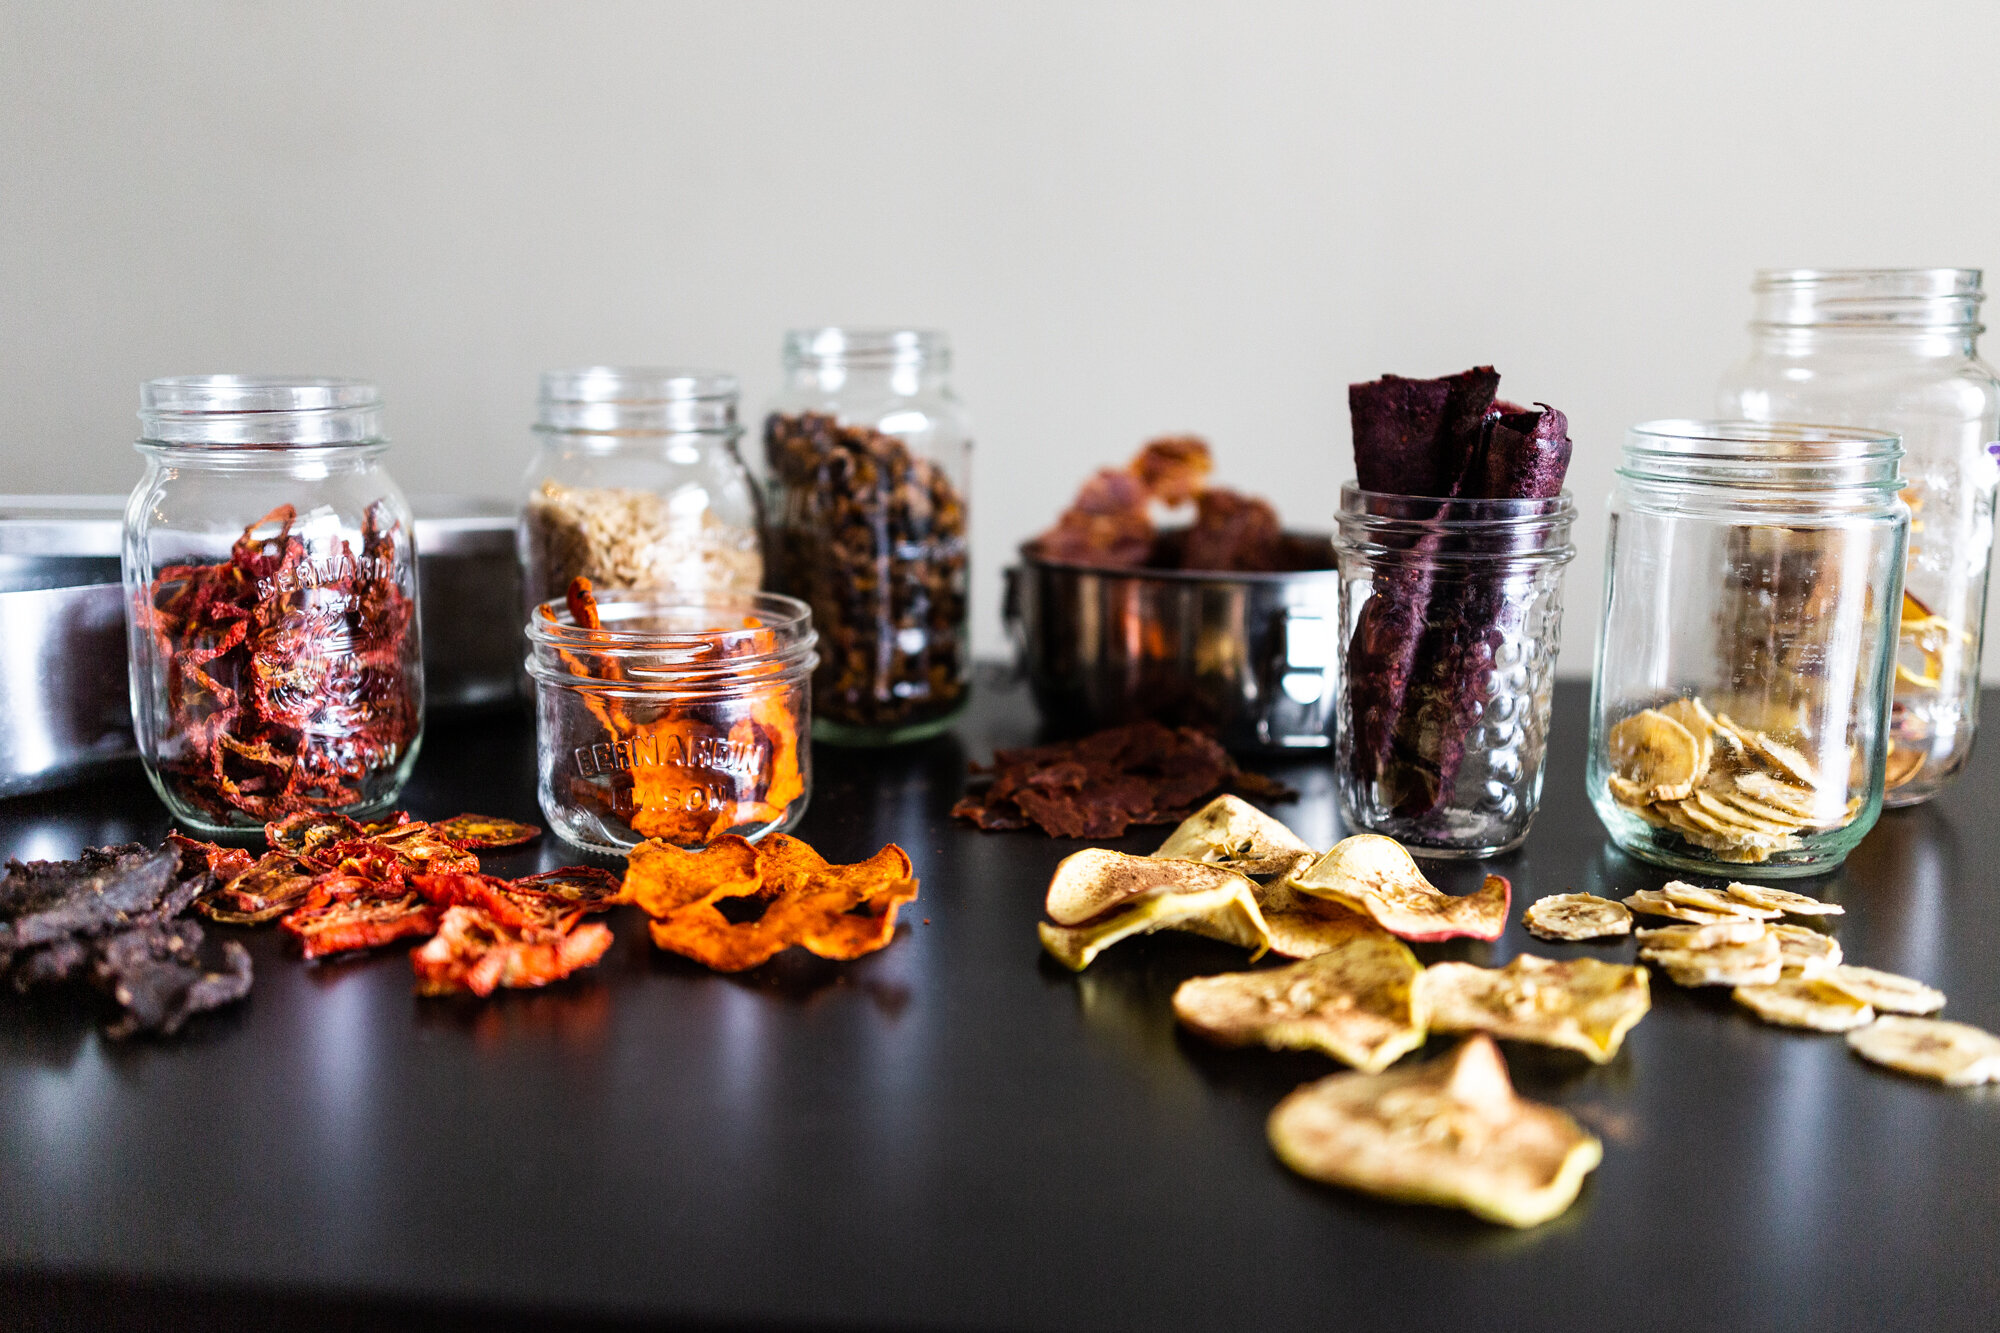 Jars full of dehydrated fruits and vegetables for long-term storage.